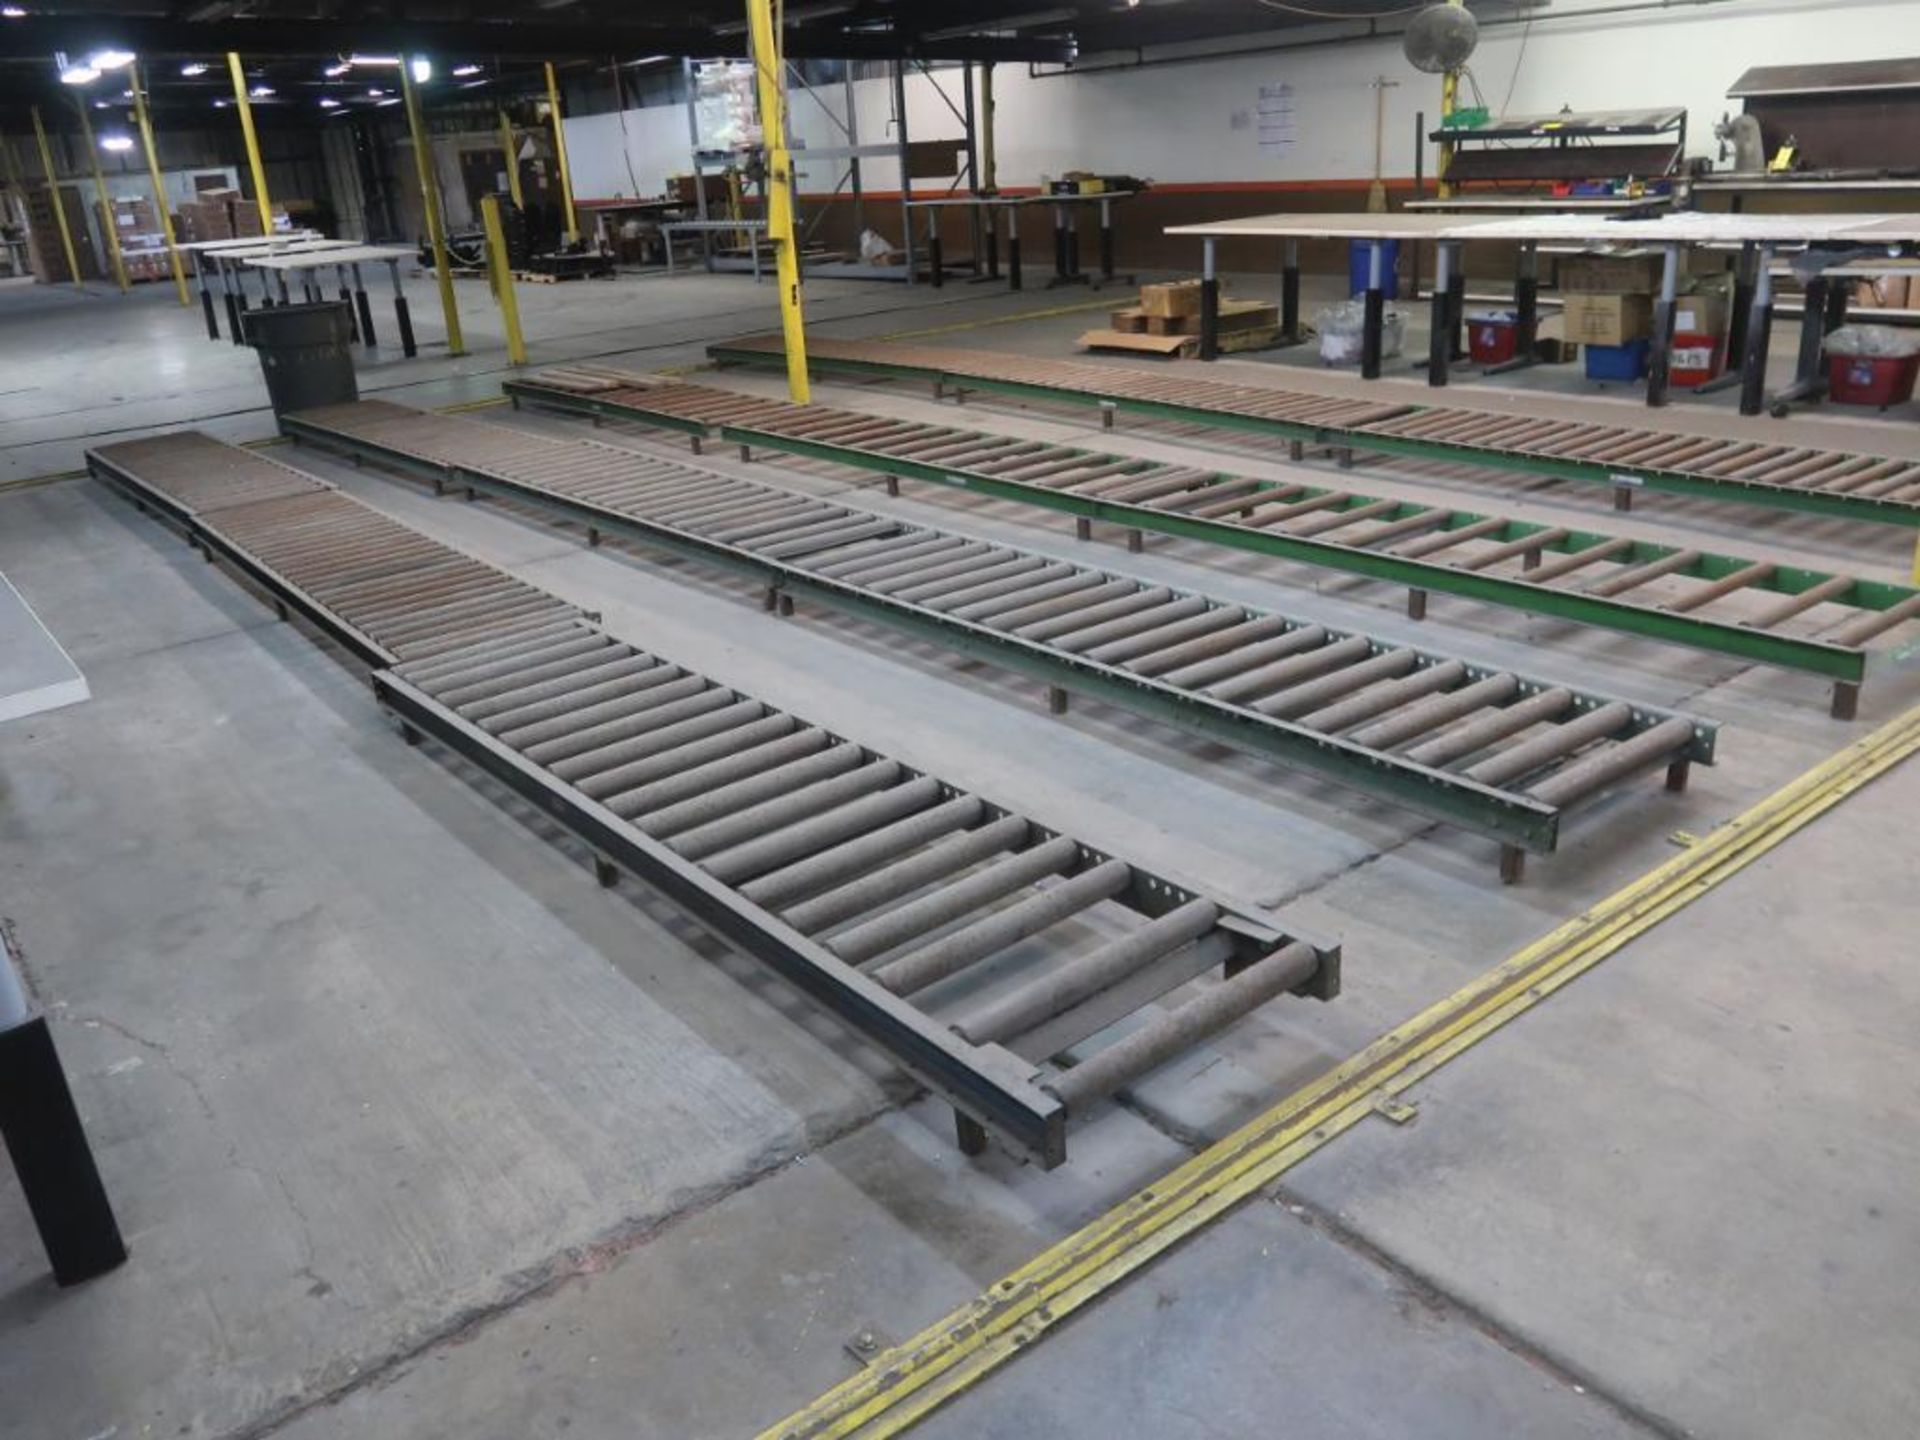 LOT: Approx. 1650 ft. Assorted Roller Conveyors & Conveyor Dolly (located throughout plant area)